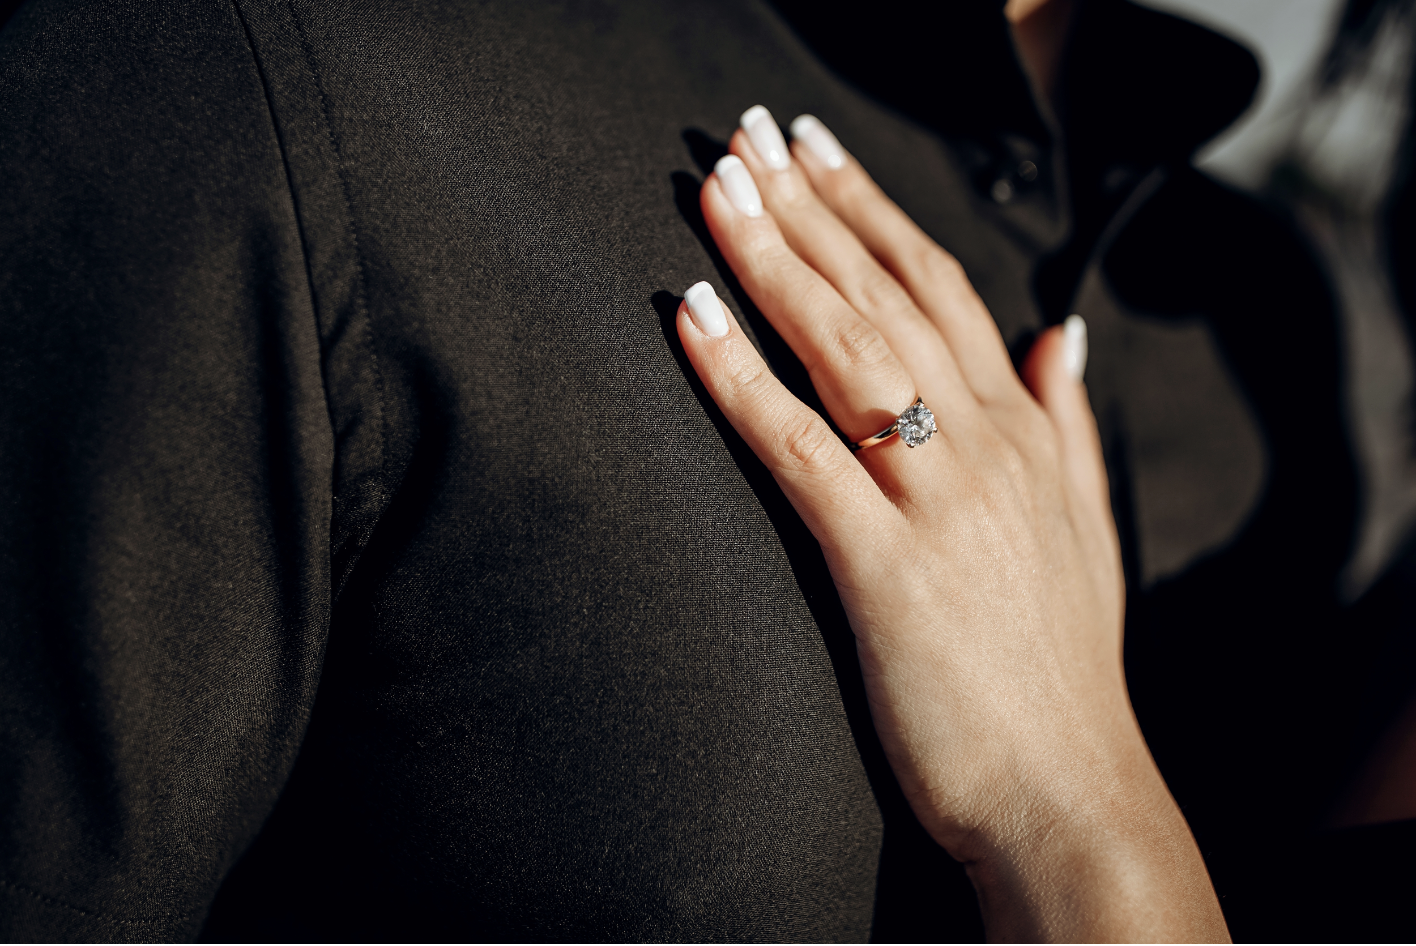 A woman's hand with a wedding ring | Source: Shutterstock